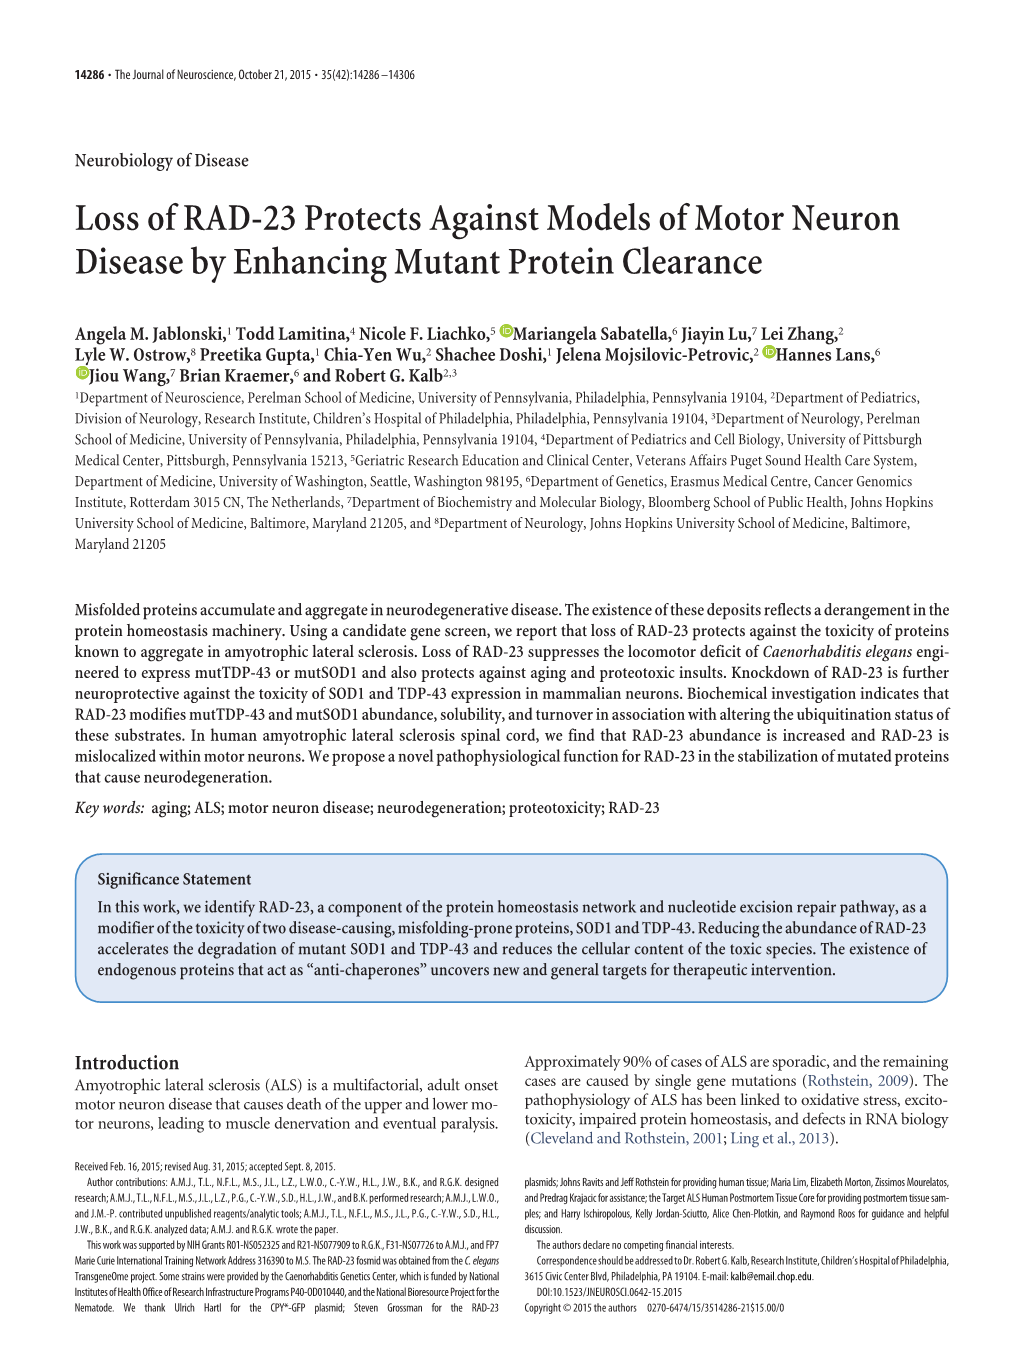 Loss of RAD-23 Protects Against Models of Motor Neuron Disease by Enhancing Mutant Protein Clearance